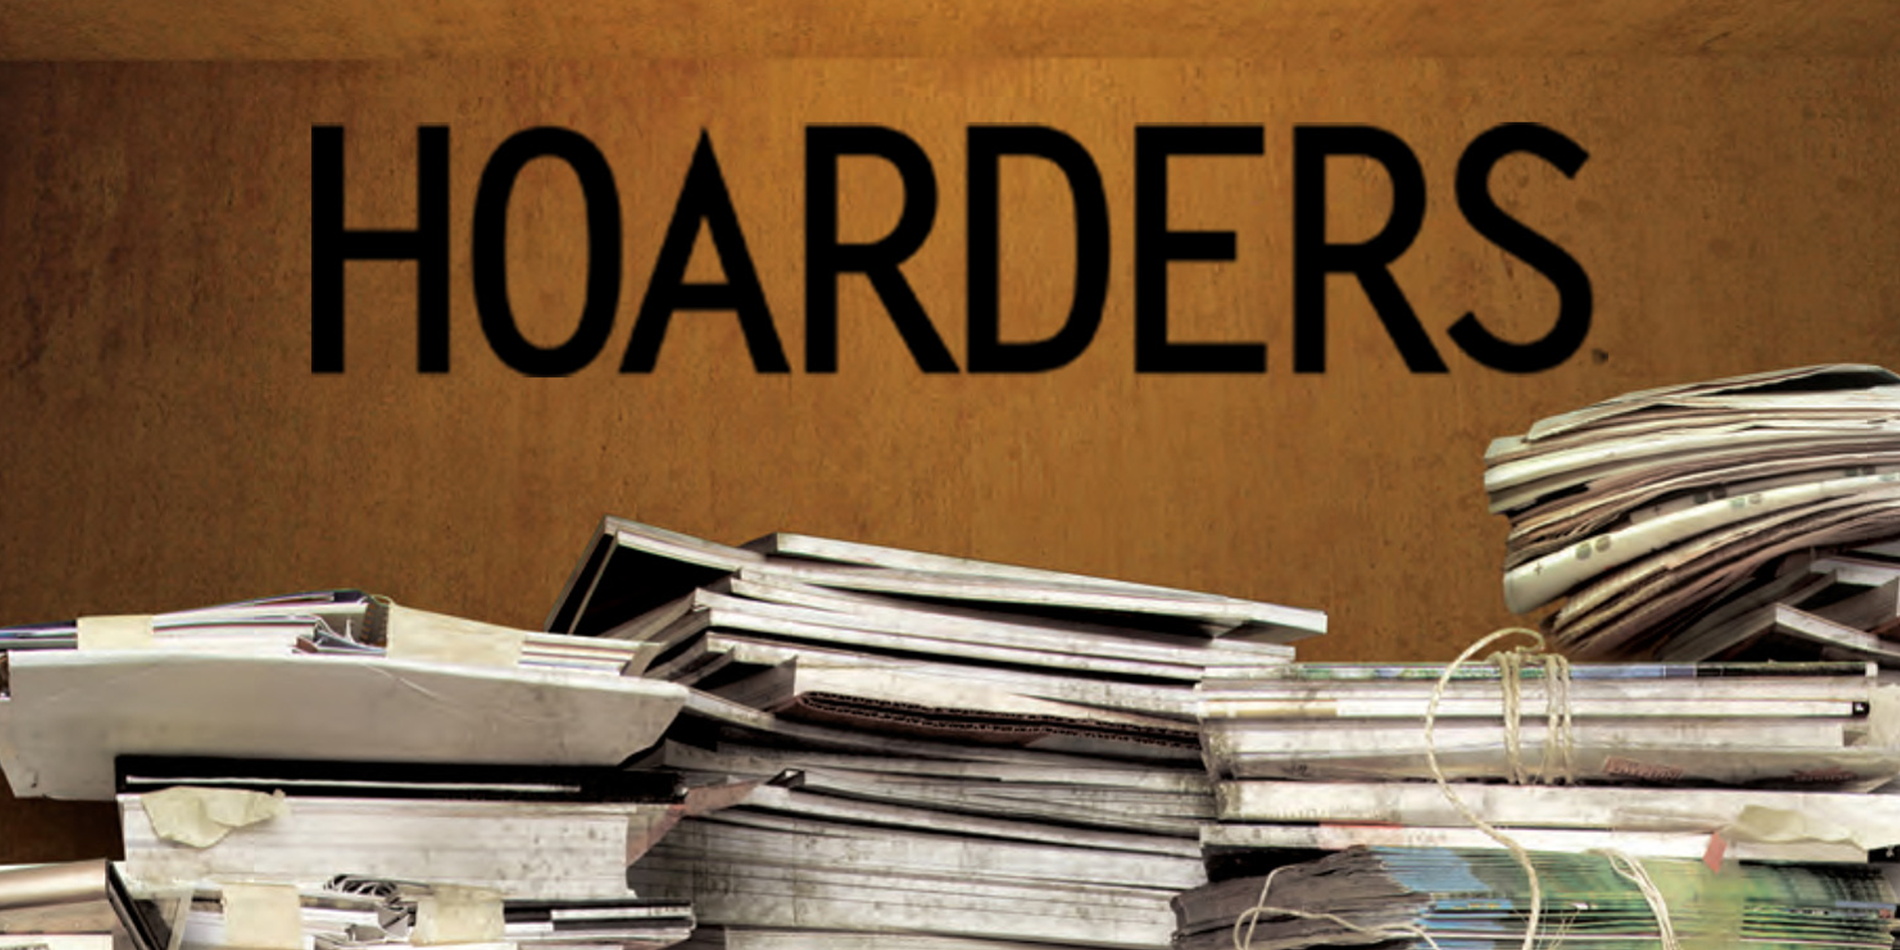 Promo picture for the show Hoarders